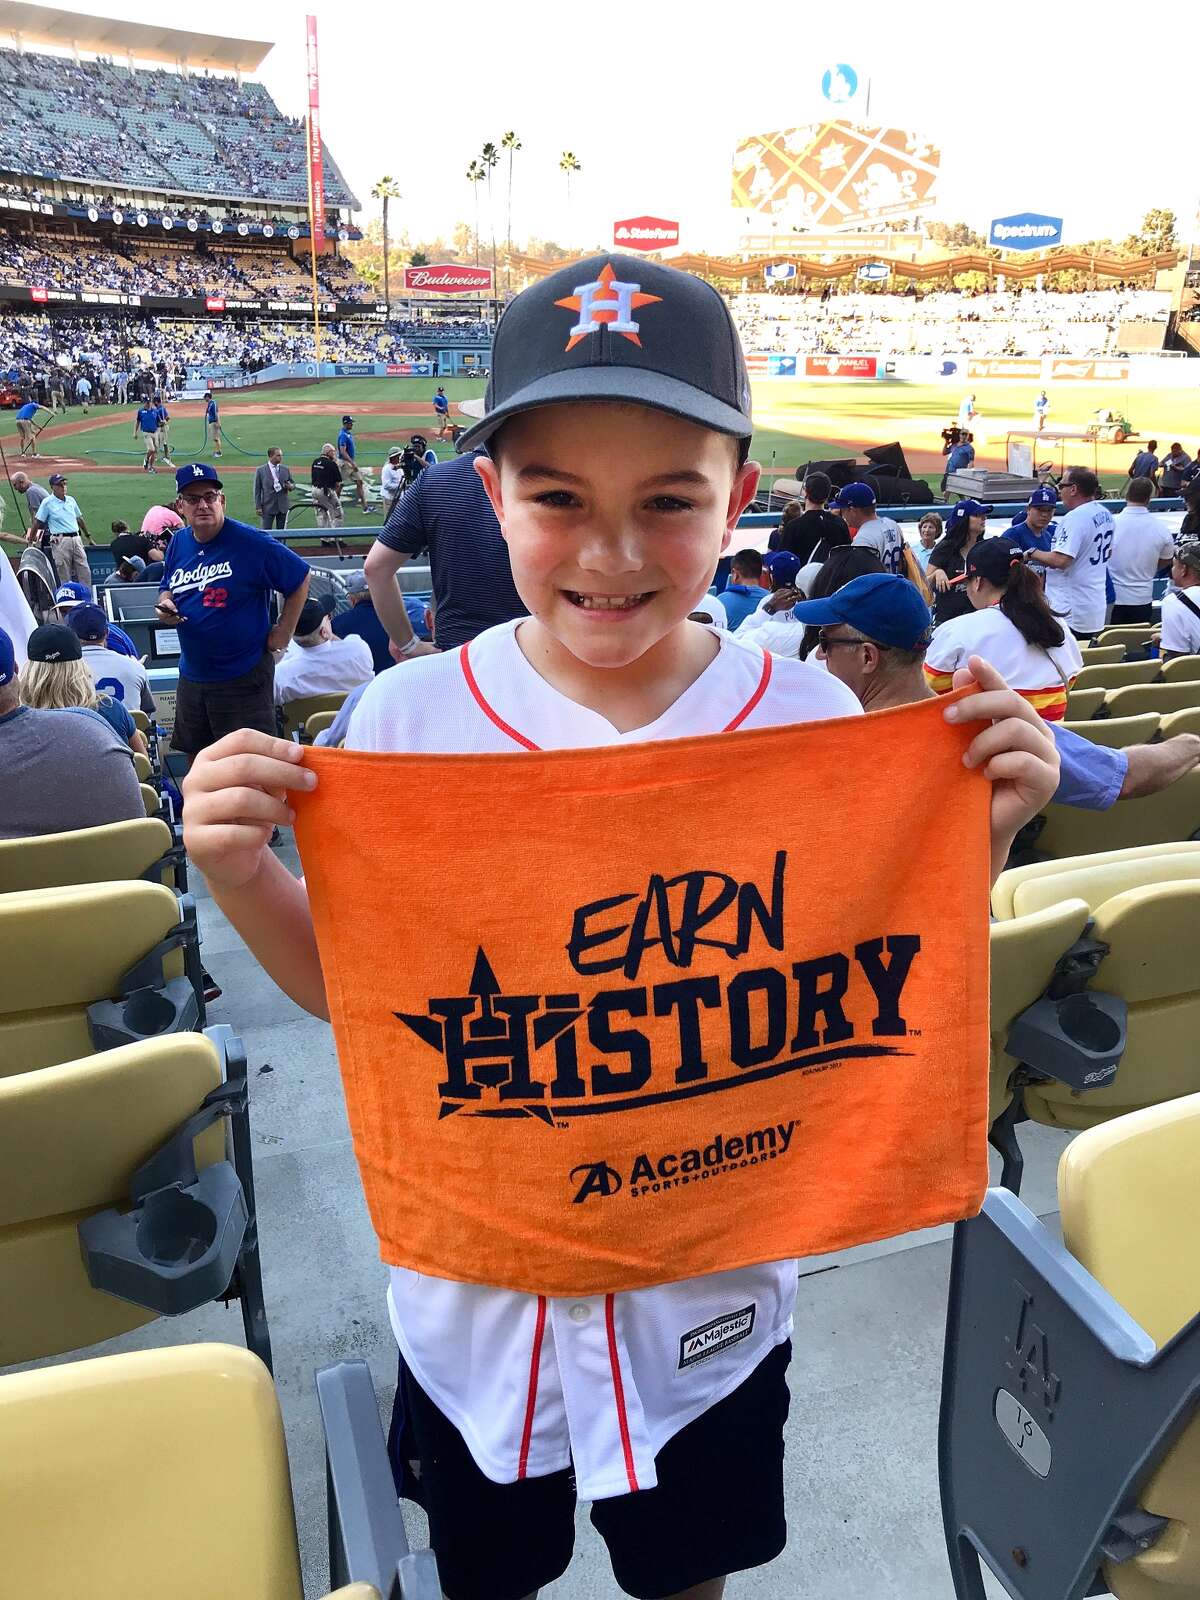 Houston Astros fans Rikki and Brian Kemp, of Nederland, and their son Chance, 8, traveled to Los Angeles for Games 1 and 2 of the World Series against the Dodgers. They met up with daughter, Logan, who moved to Los Angeles in January to work as a model for LA Models Agency. Here, Chance holds up a Houston Astros fan towel before the start of Game 2. (Photo provided by Rikki Kemp)